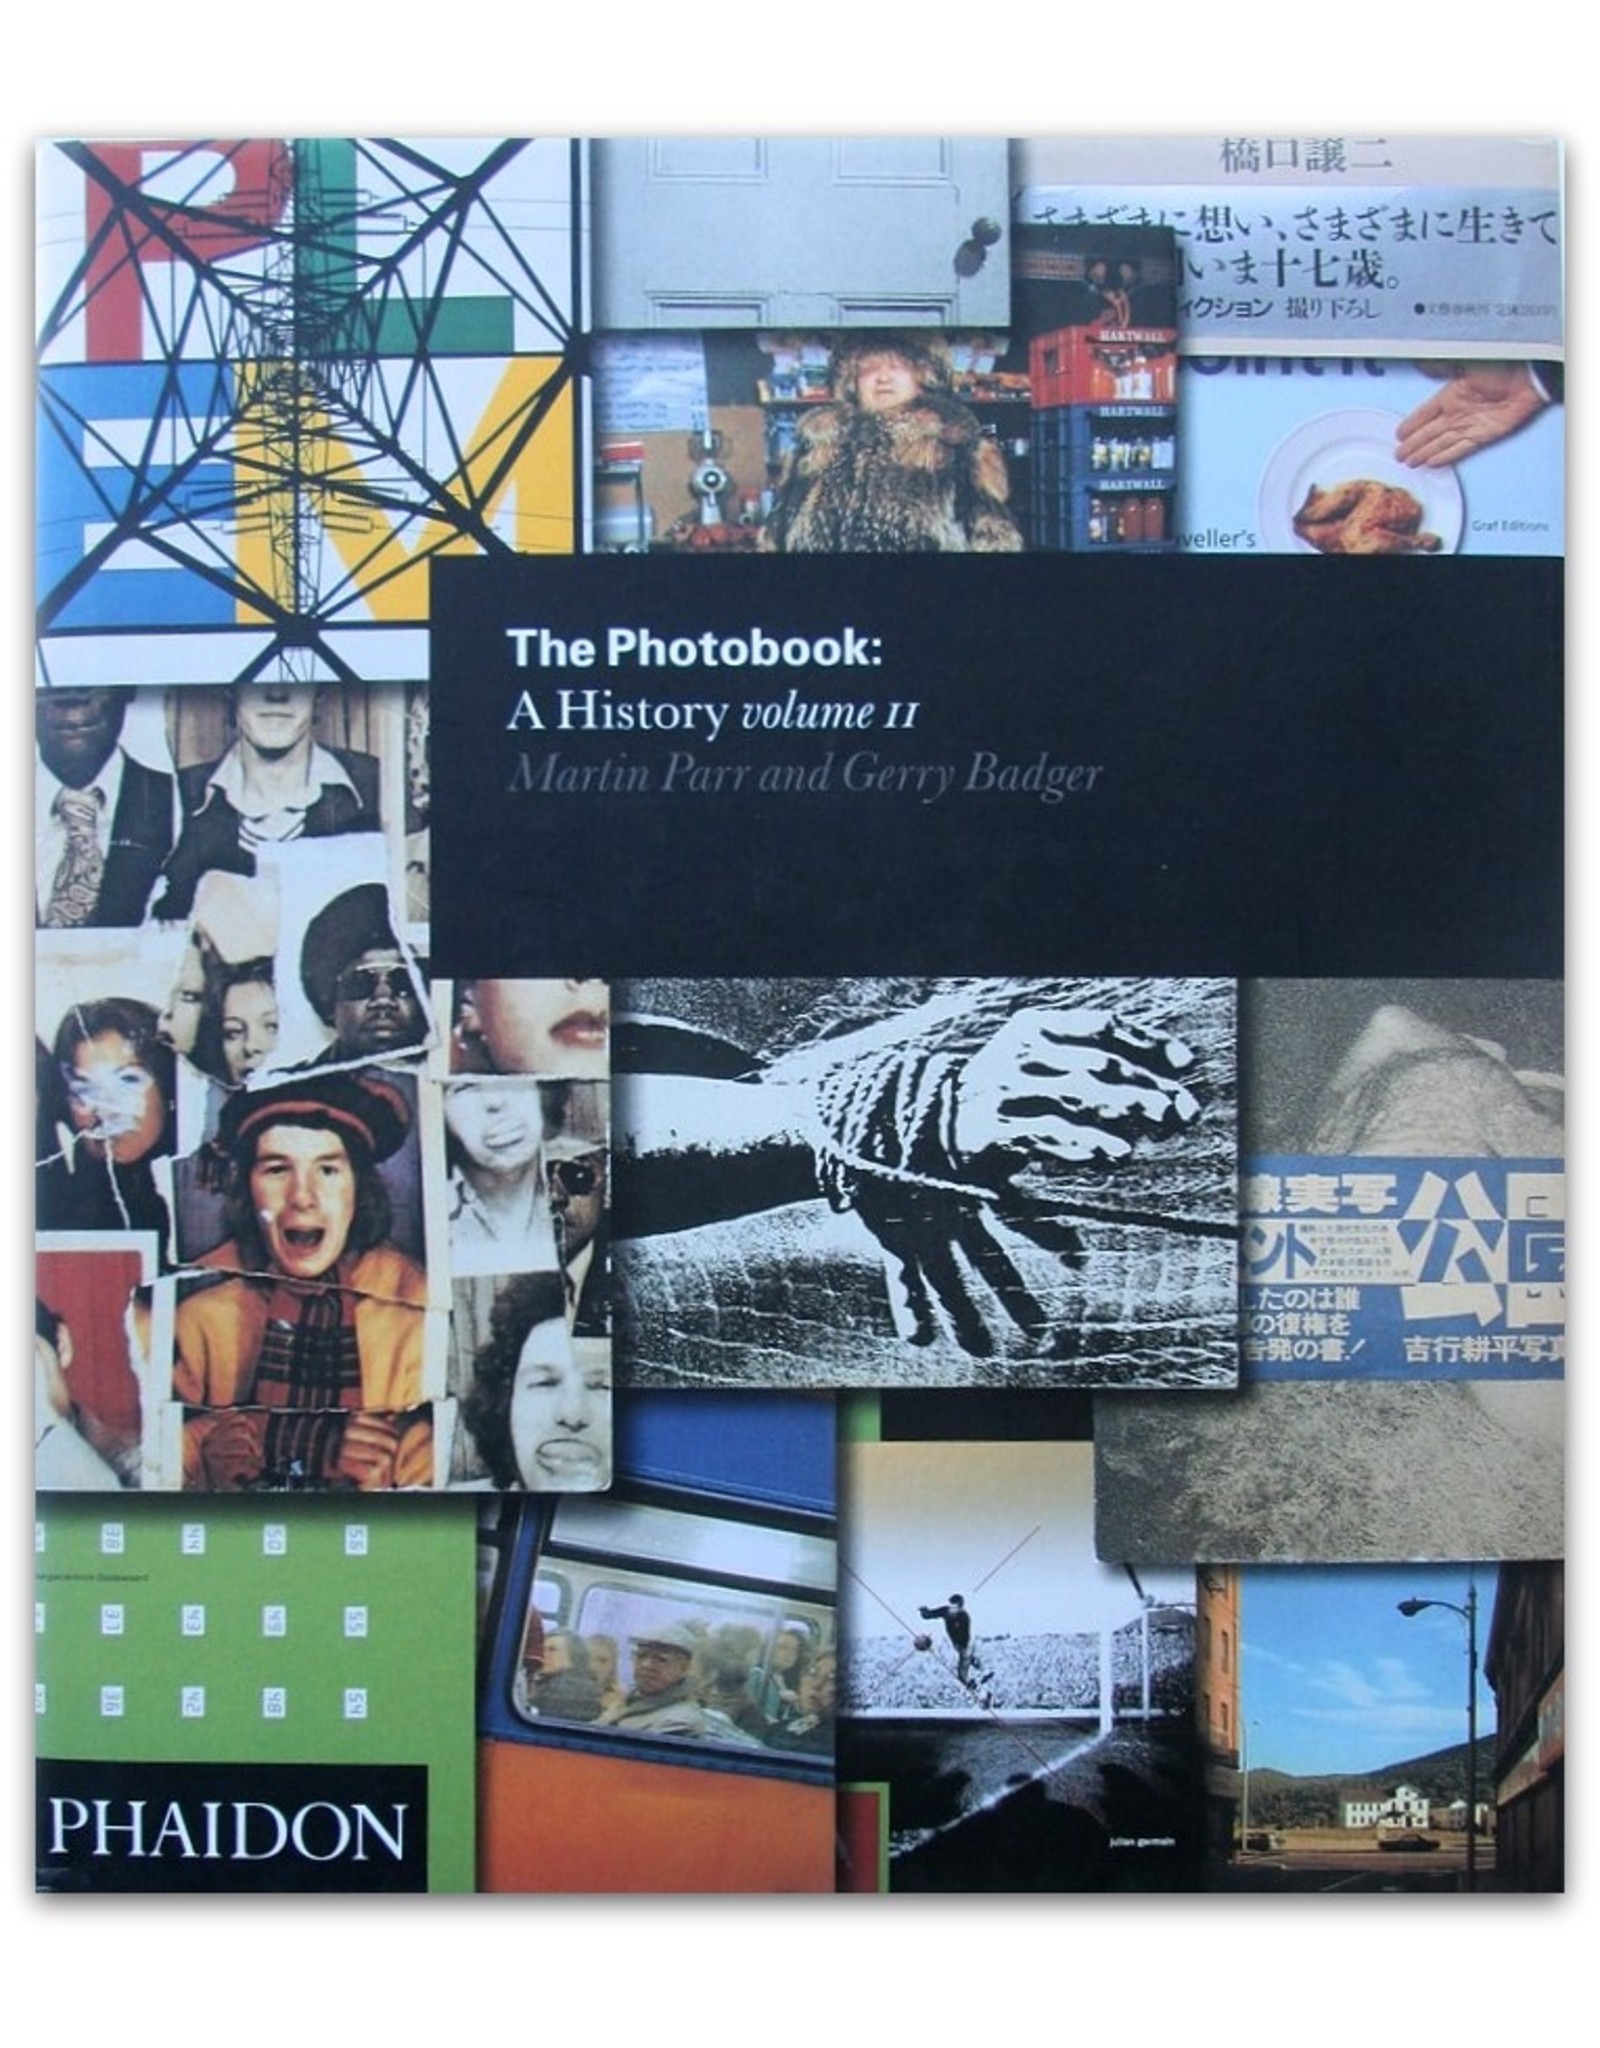 Martin Parr & Gerry Badger - The Photobook: A History. Volume II